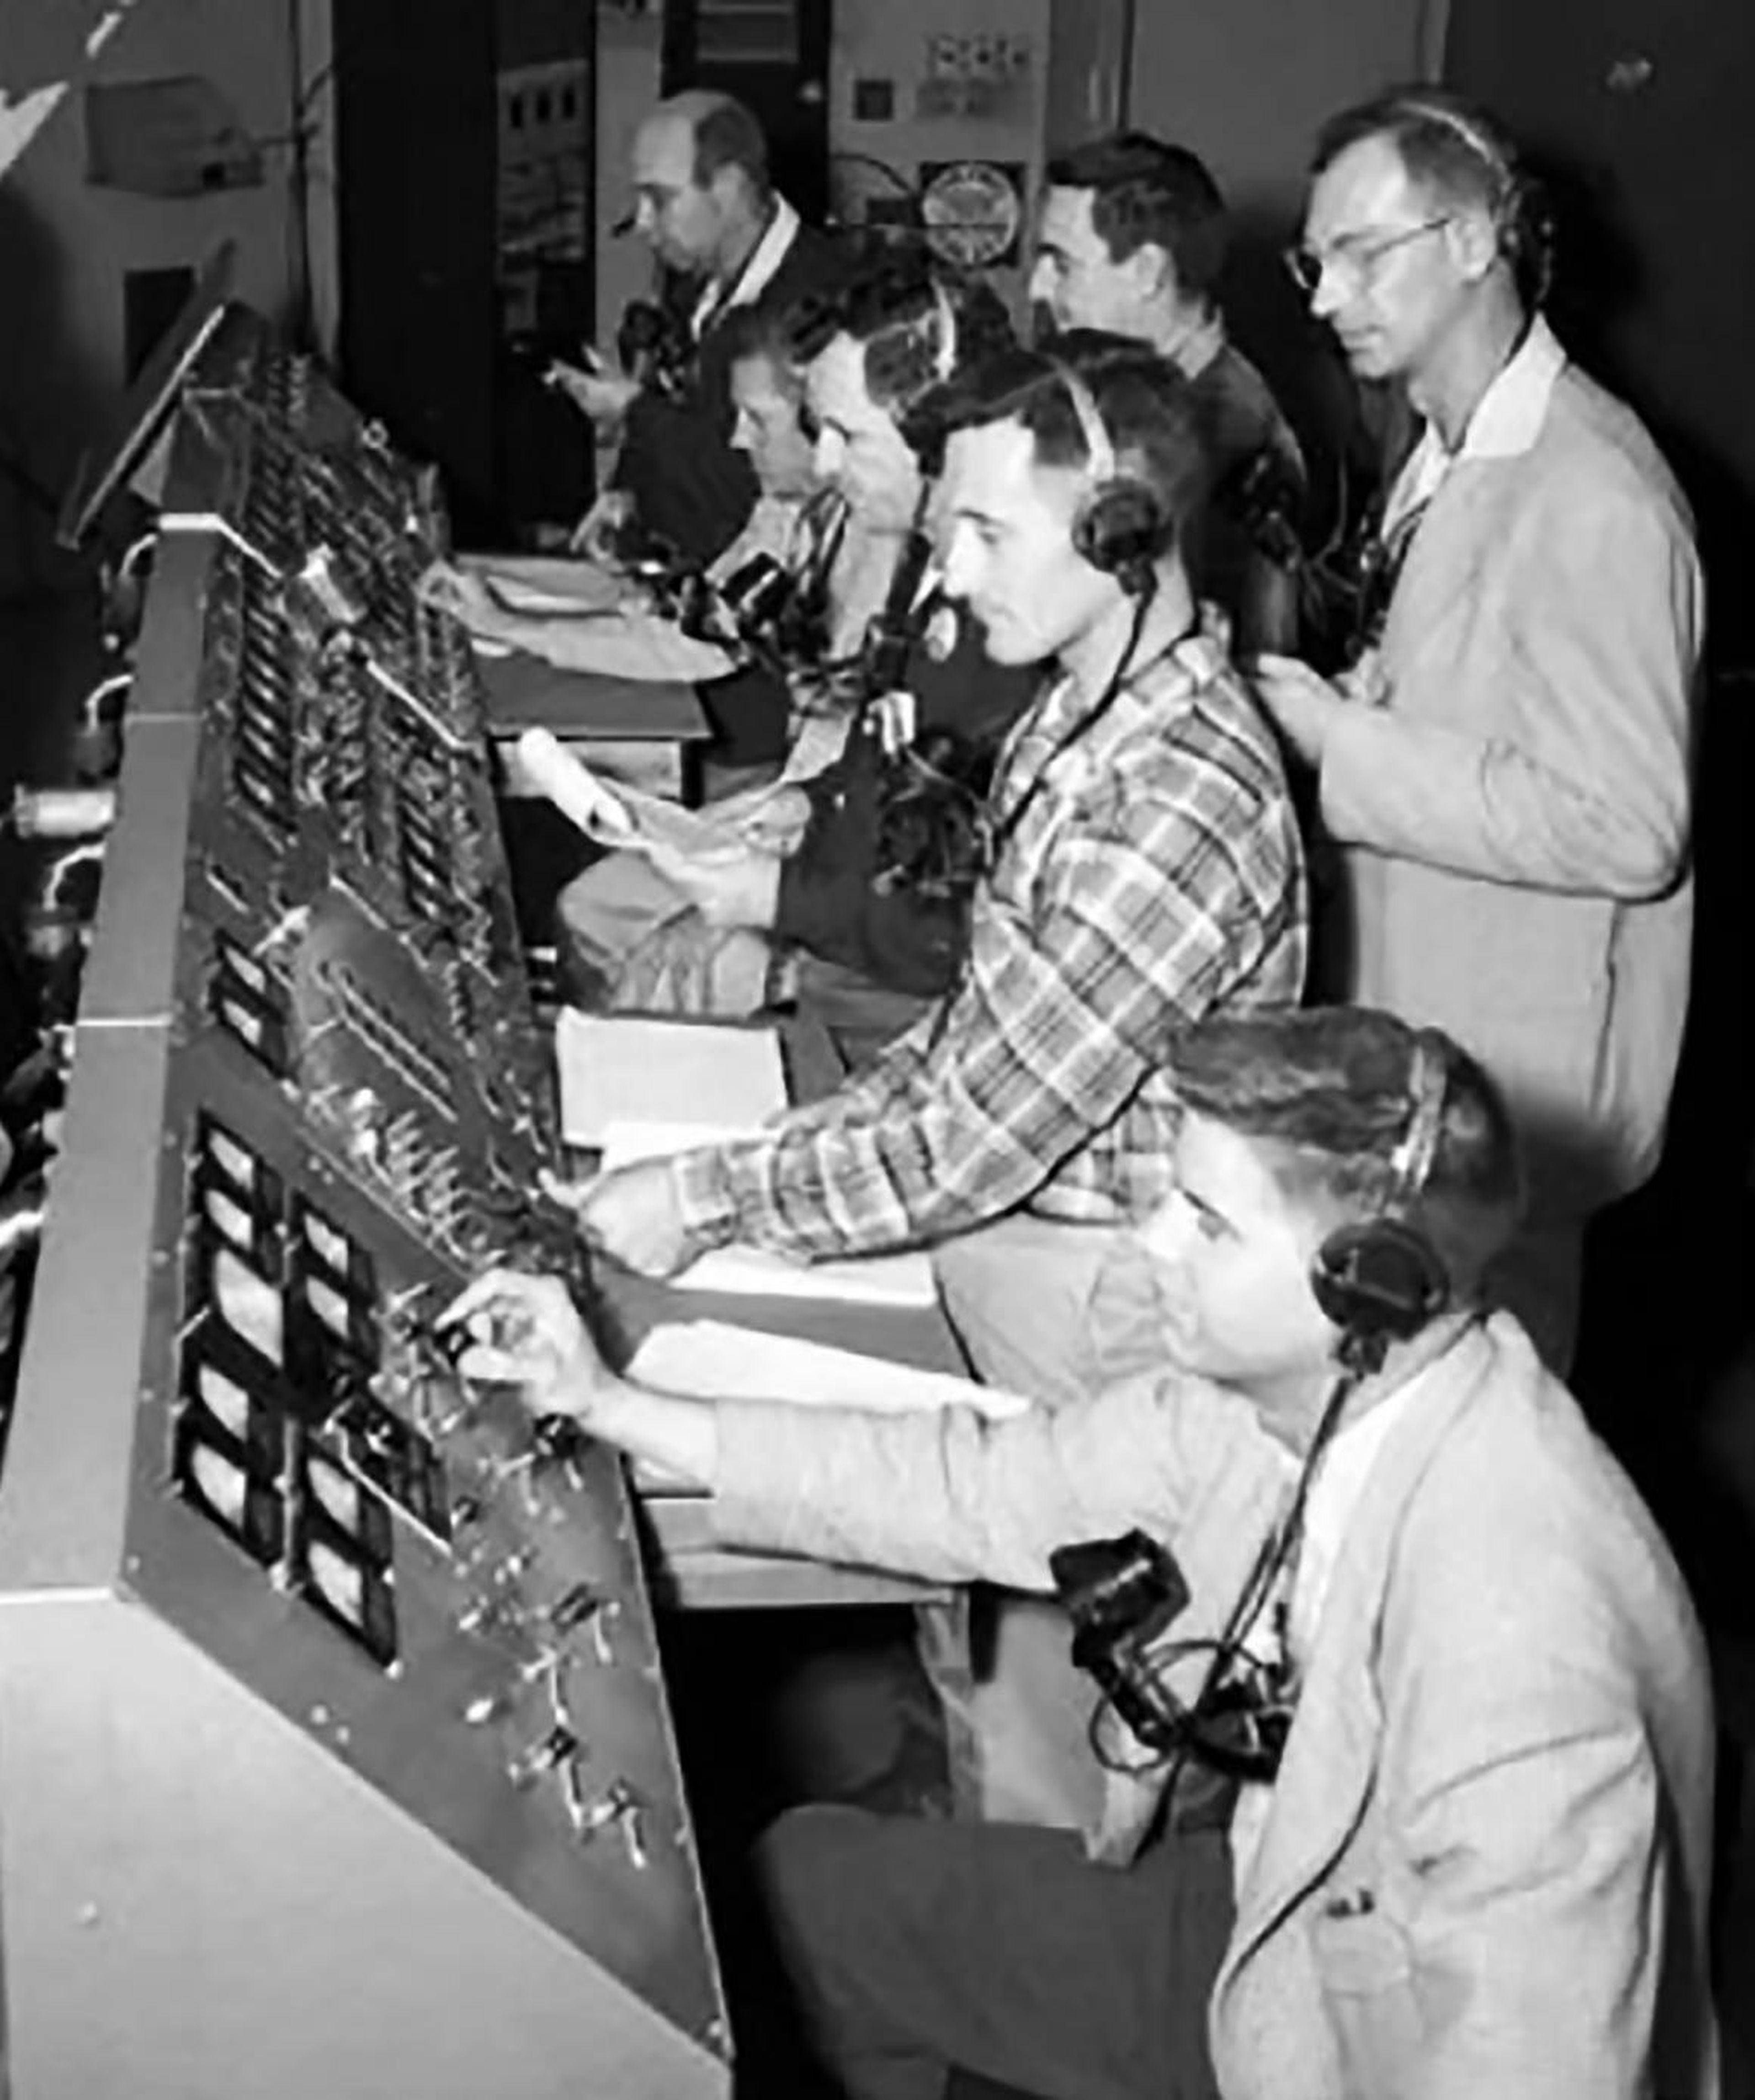 Technicians and engineers oversaw the liftoff of Explorer 1 from a control room at Space Launch Complex 26 at what was then known as the Cape Canaveral Missile Annex in Florida.